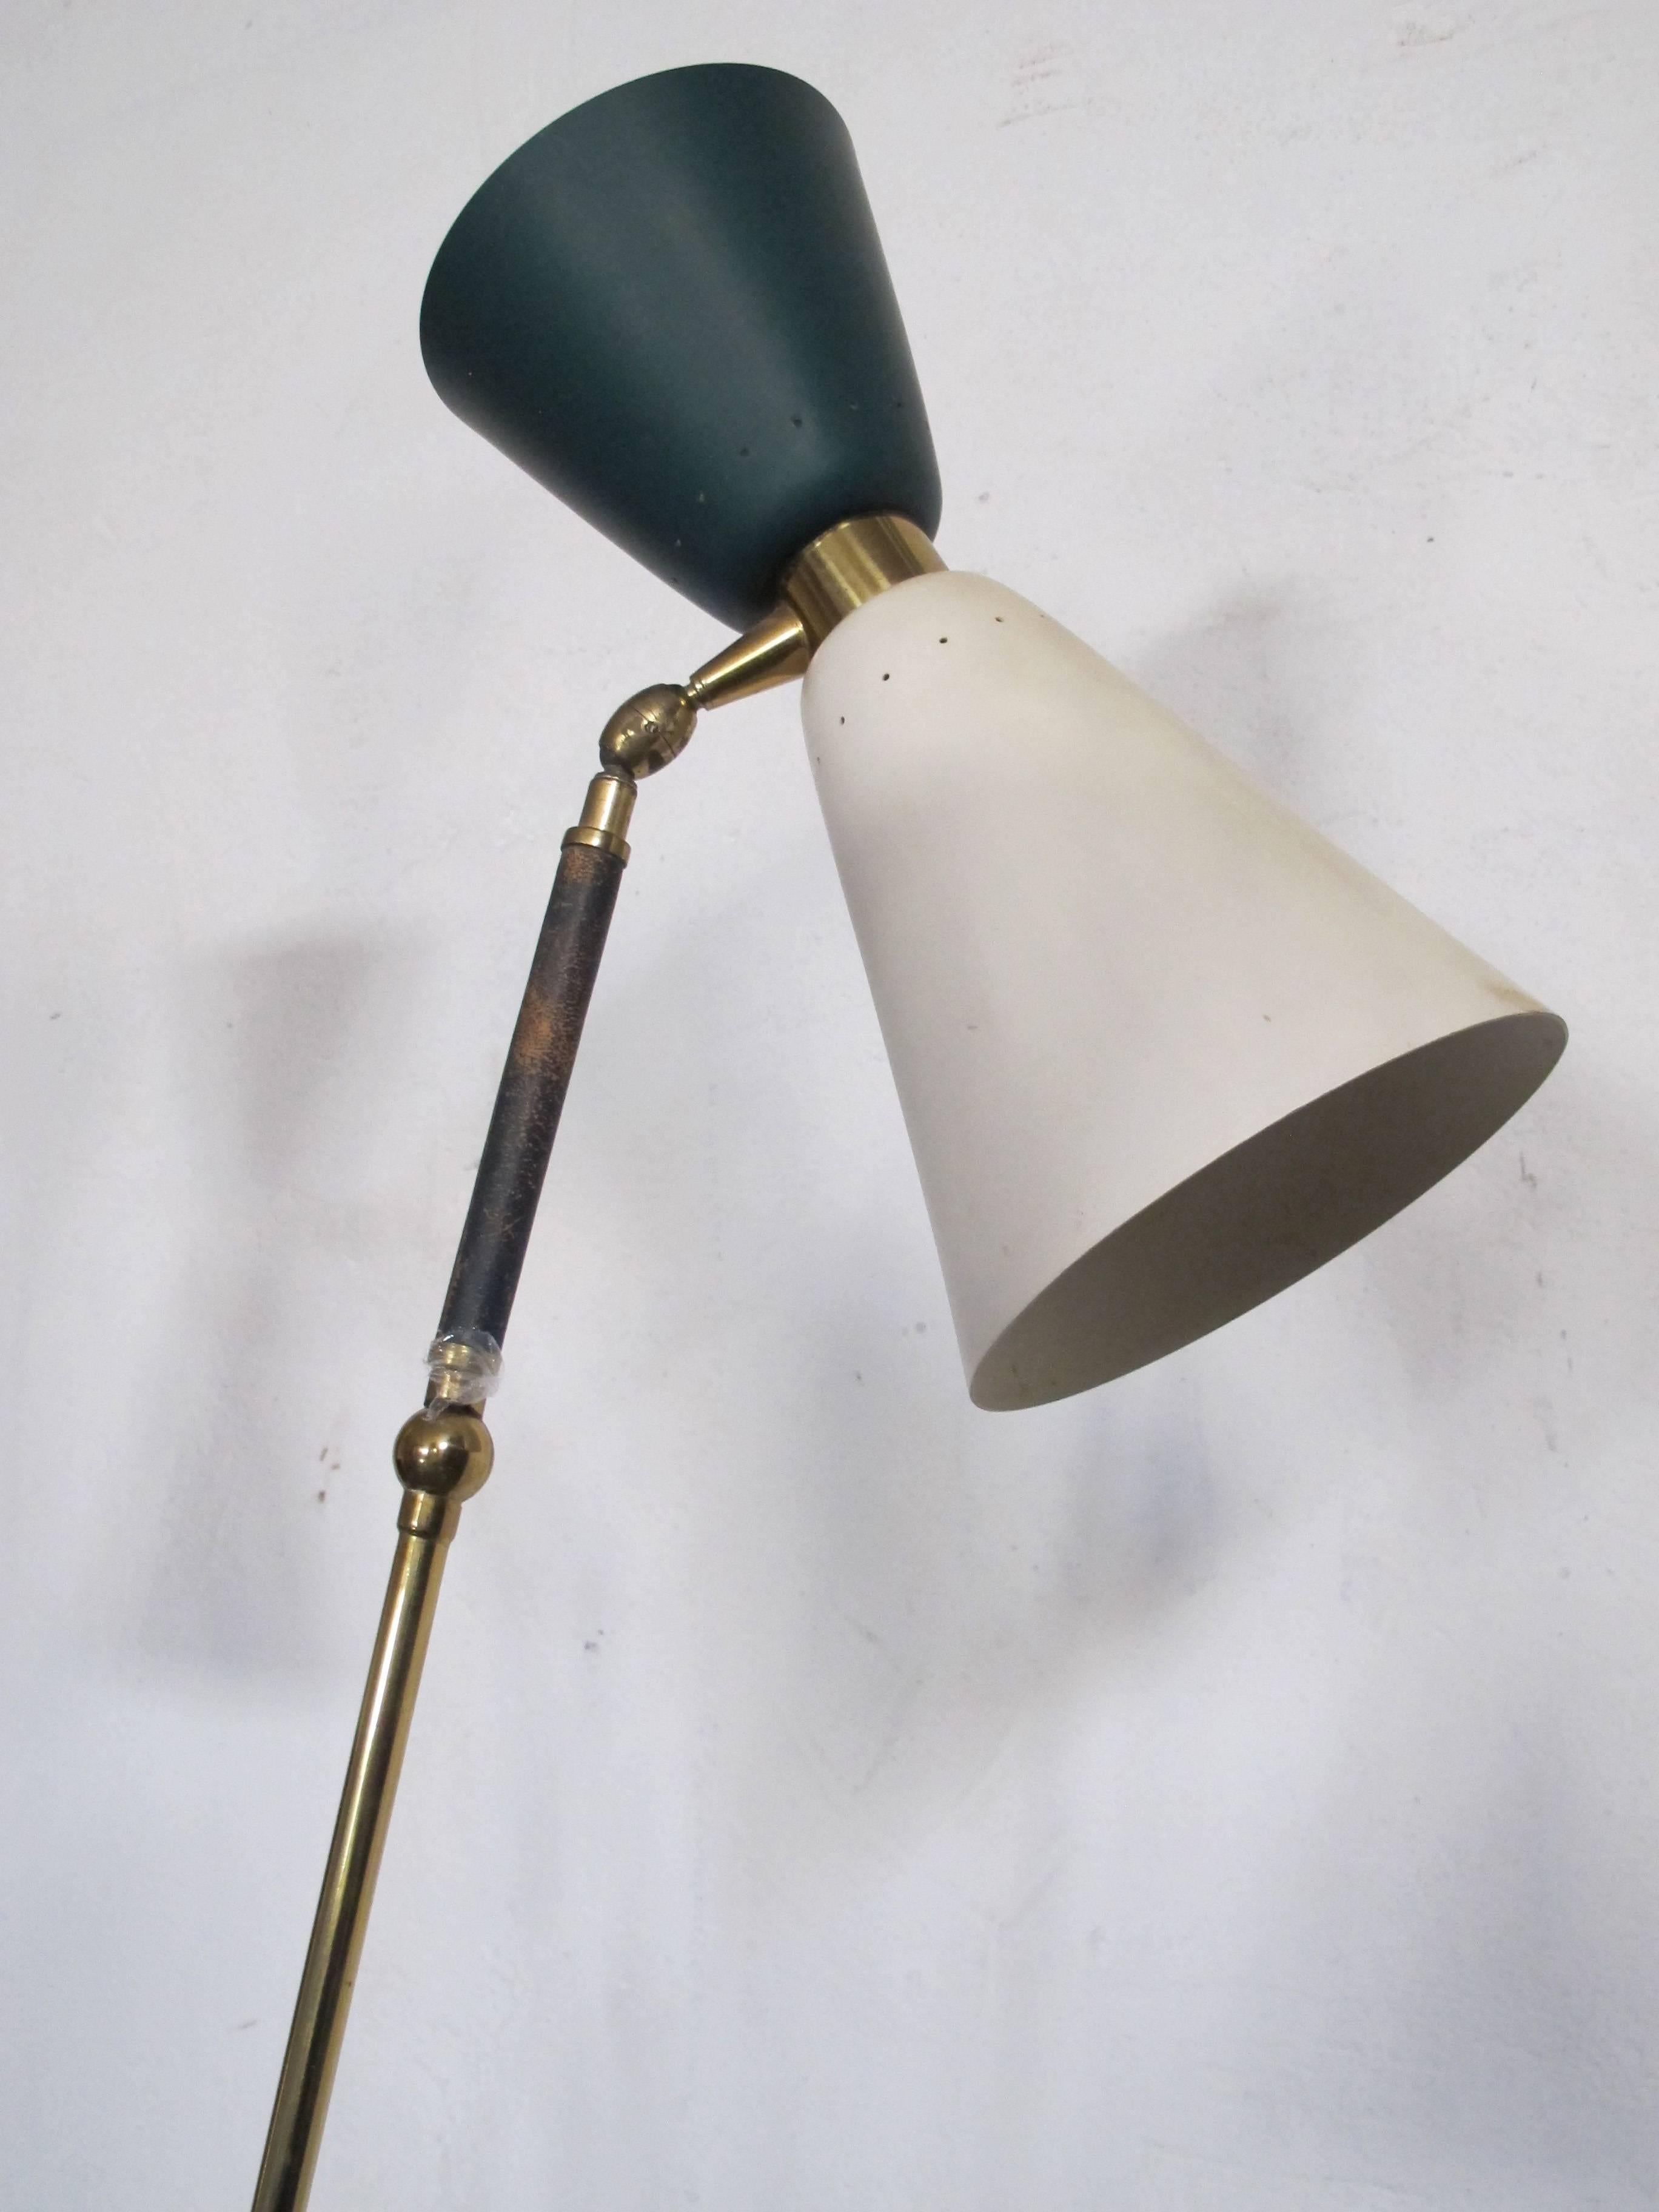 Rare floor lamp, design Stilnovo, 1950.
Brass structure, light diffusers in painted metal, six lights,
flap original, original colors, the stems are adjustable.